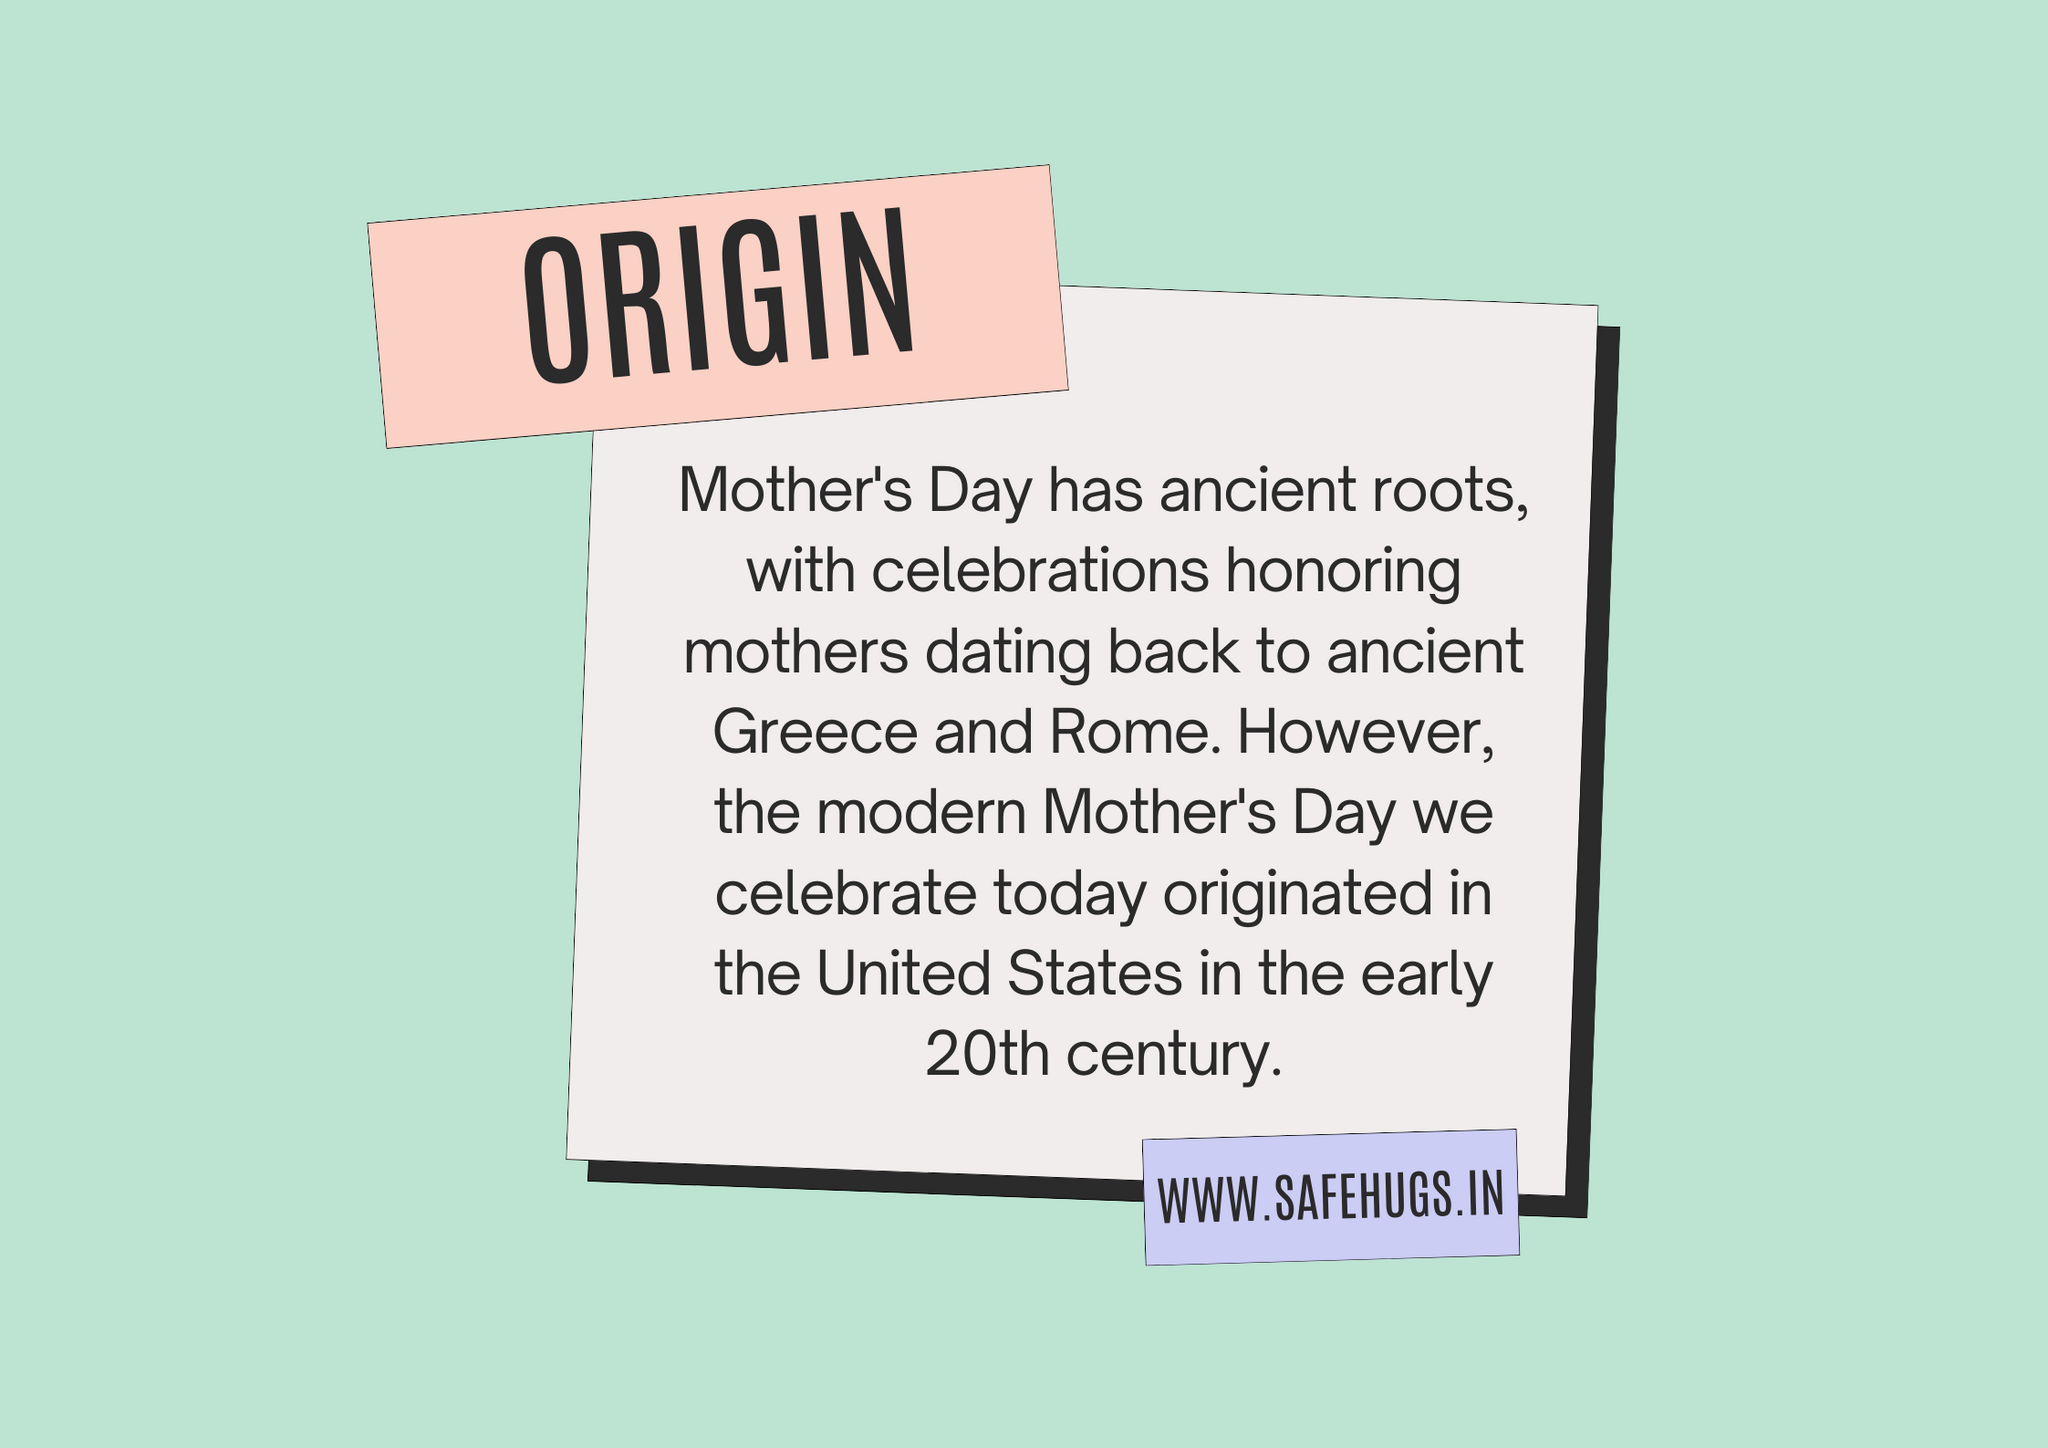 Ancient roots of celebrating Mother's Day 